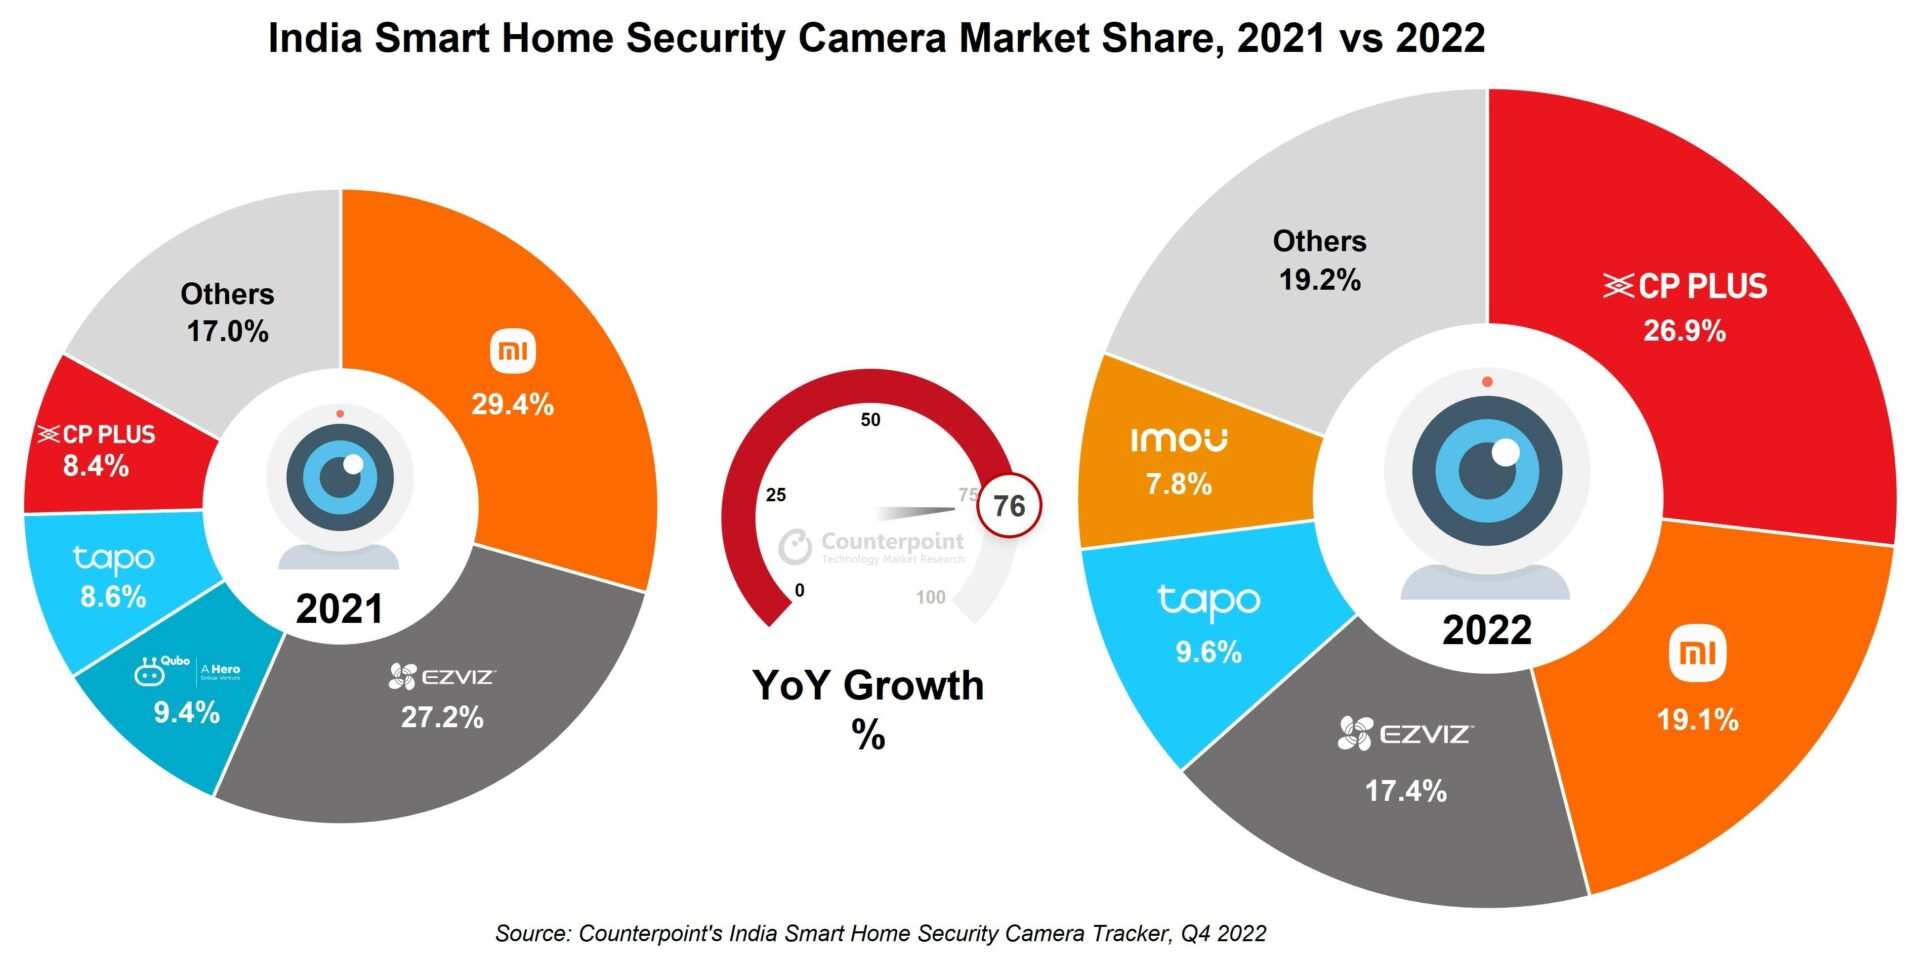 India Smart Home Security Camera Market Share, 2021 vs 2022, Counterpoint Research